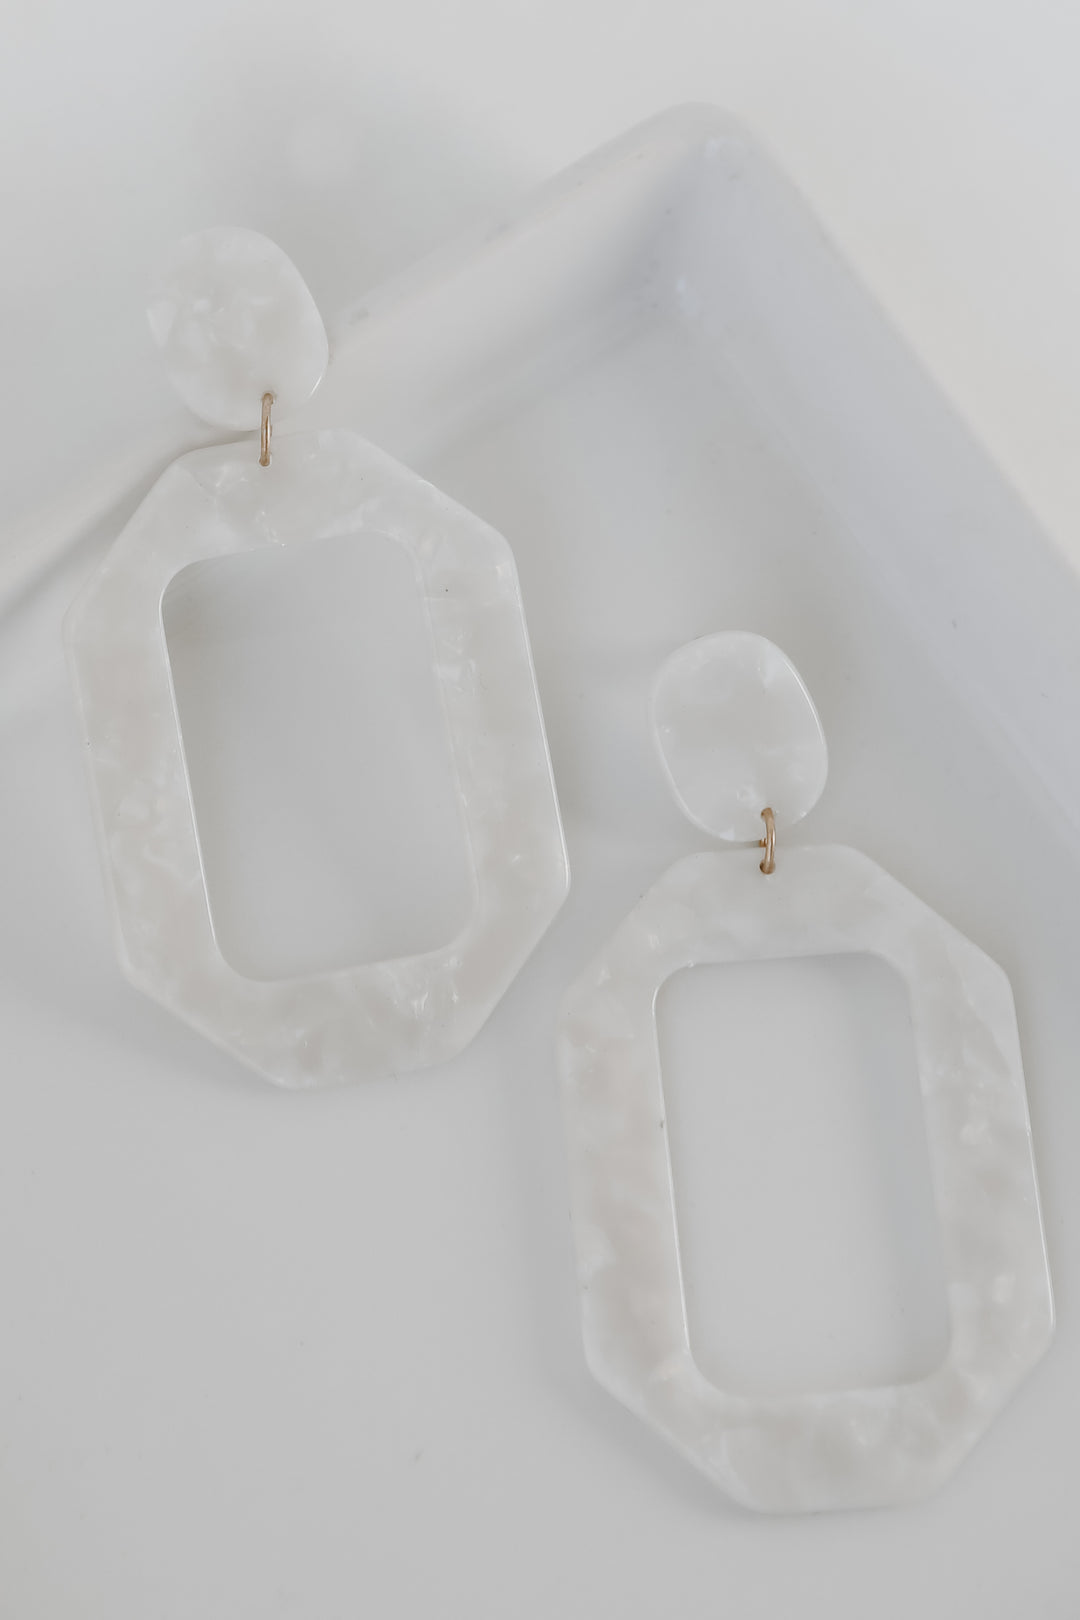 Acrylic Statement Earrings in white flat lay